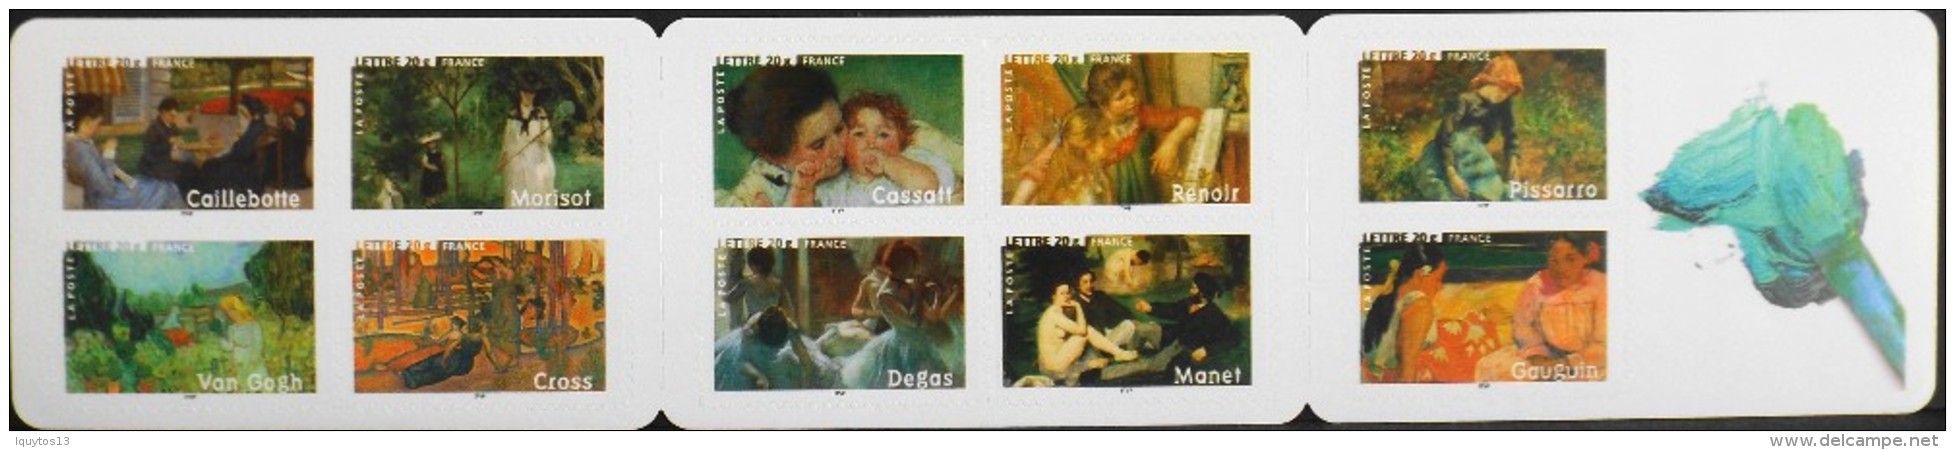 FRANCE CARNET 2006 - Les Impressionnistes - 10 TIMBRES Prioritaires  AUTOADHESIFS NEUFS** - Carnets